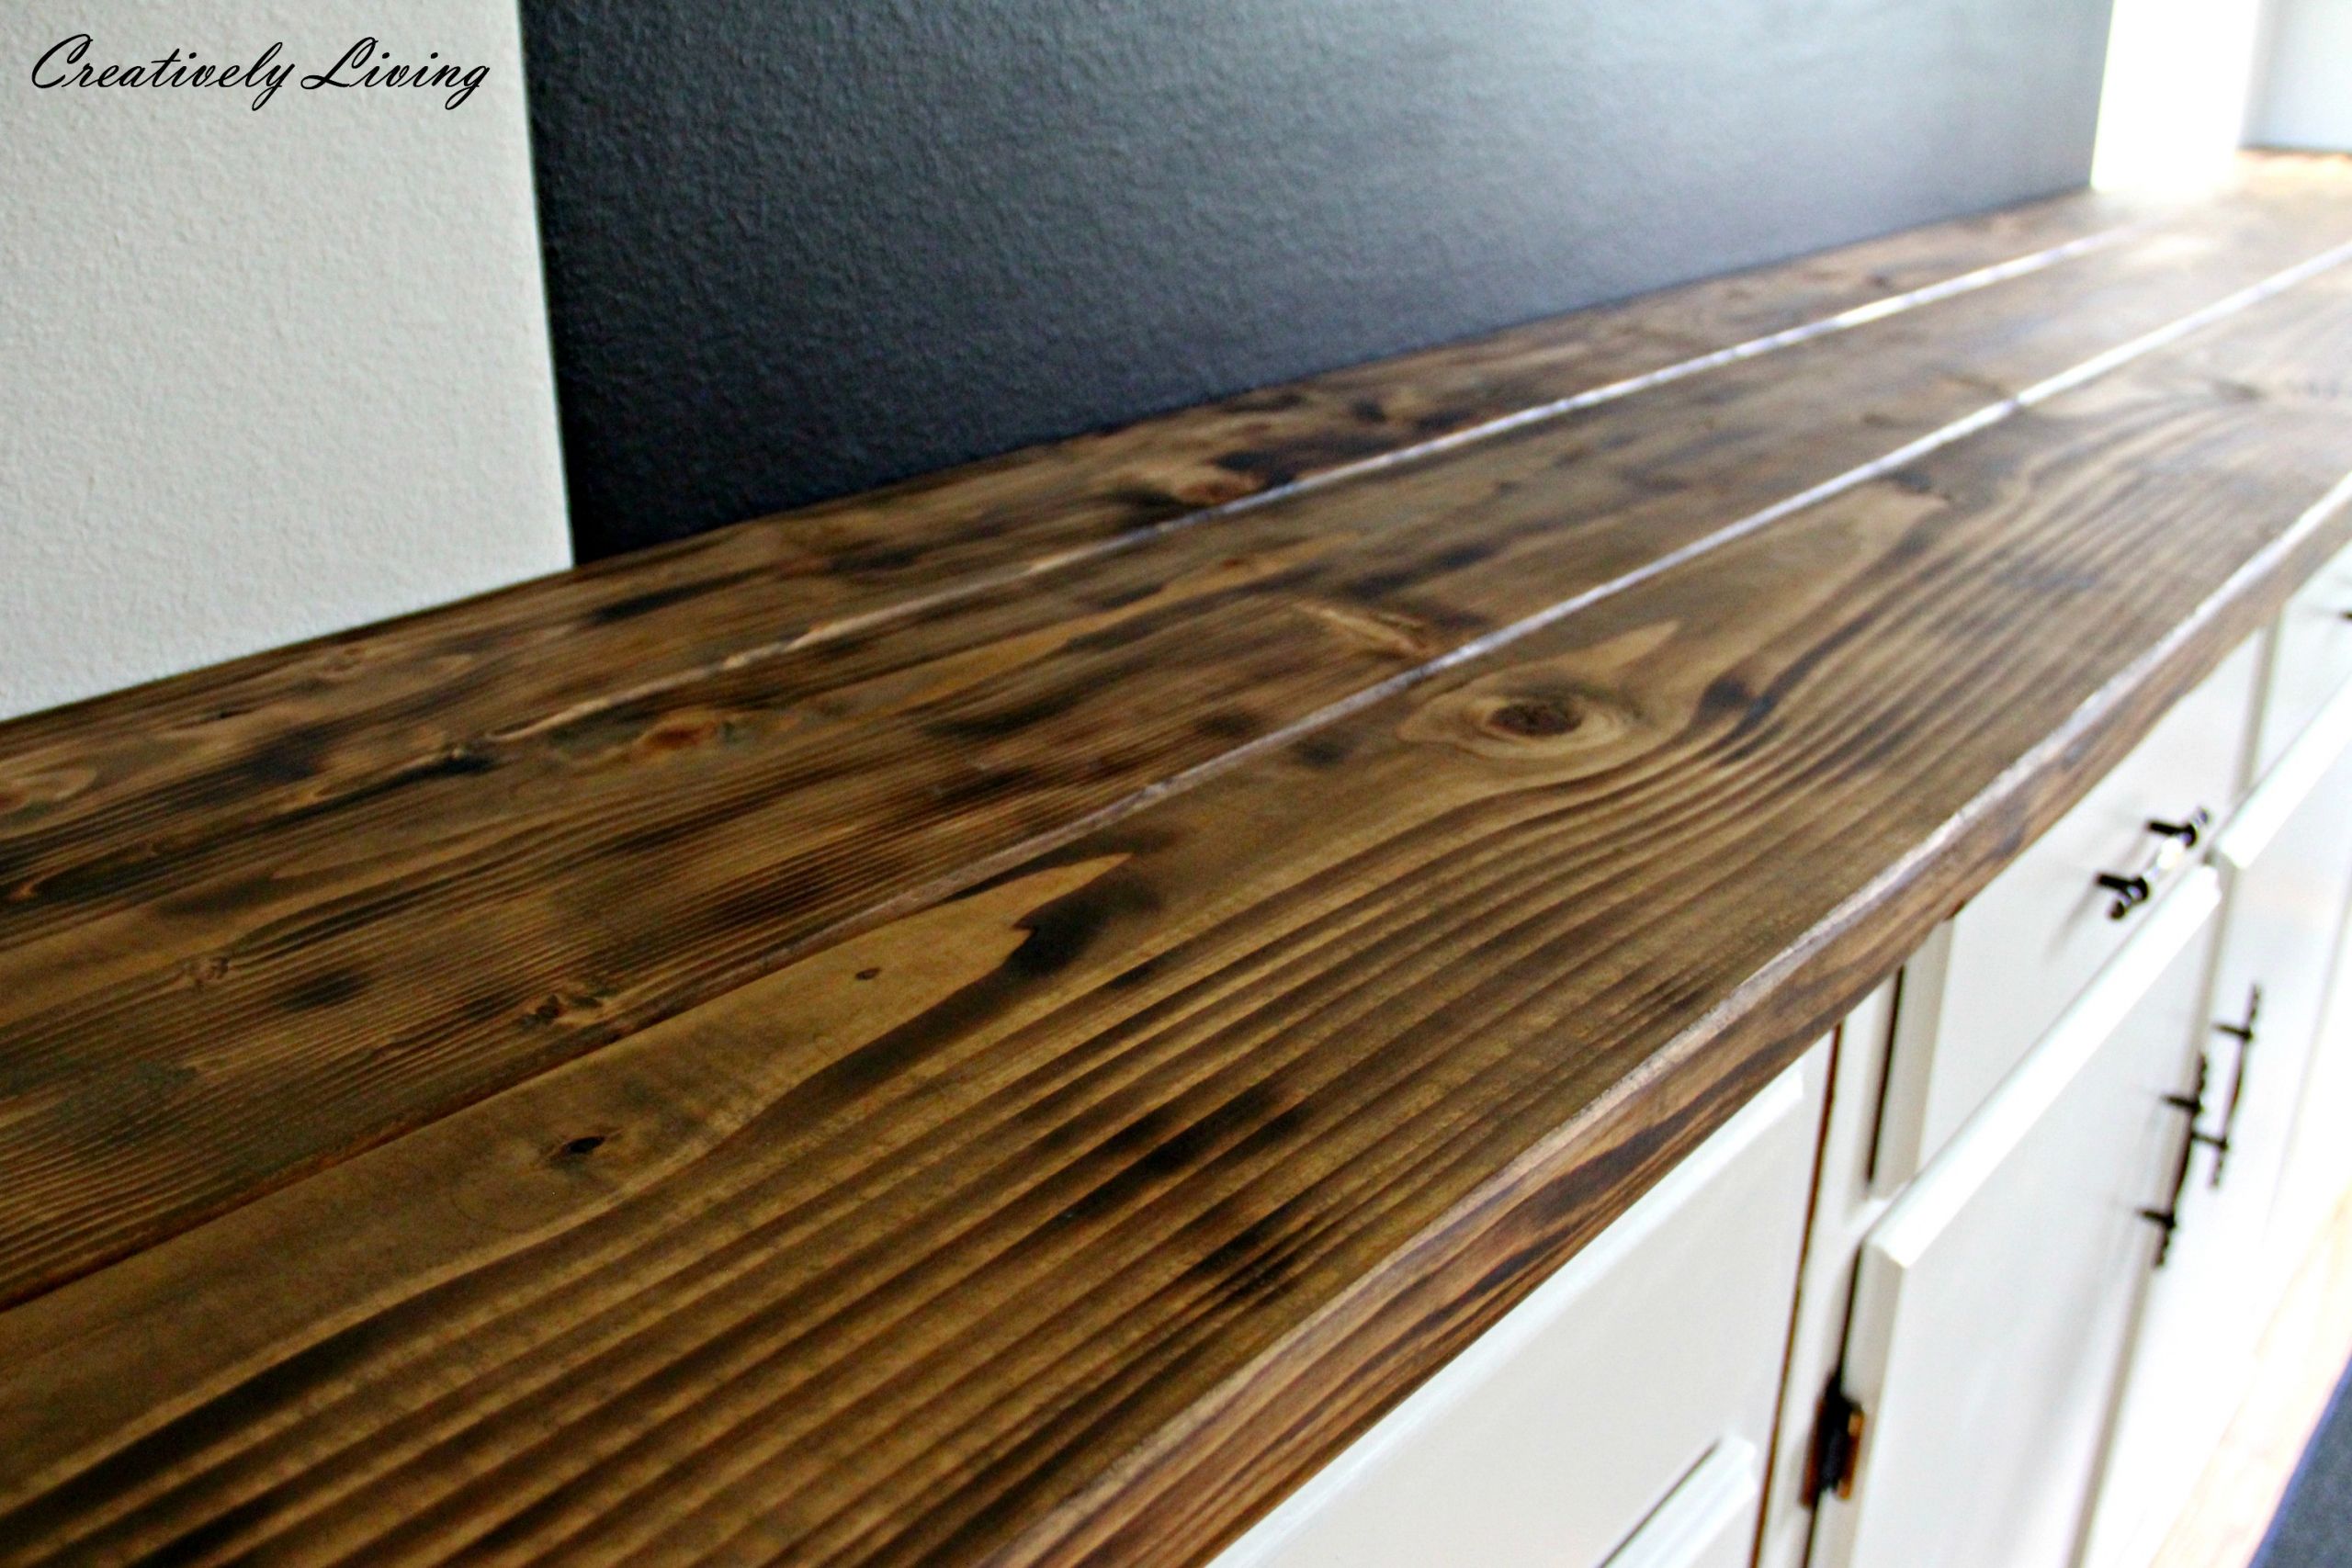 Wood Plank Countertops DIY
 Torched DIY Rustic Wood Counter Top for Under $50 by